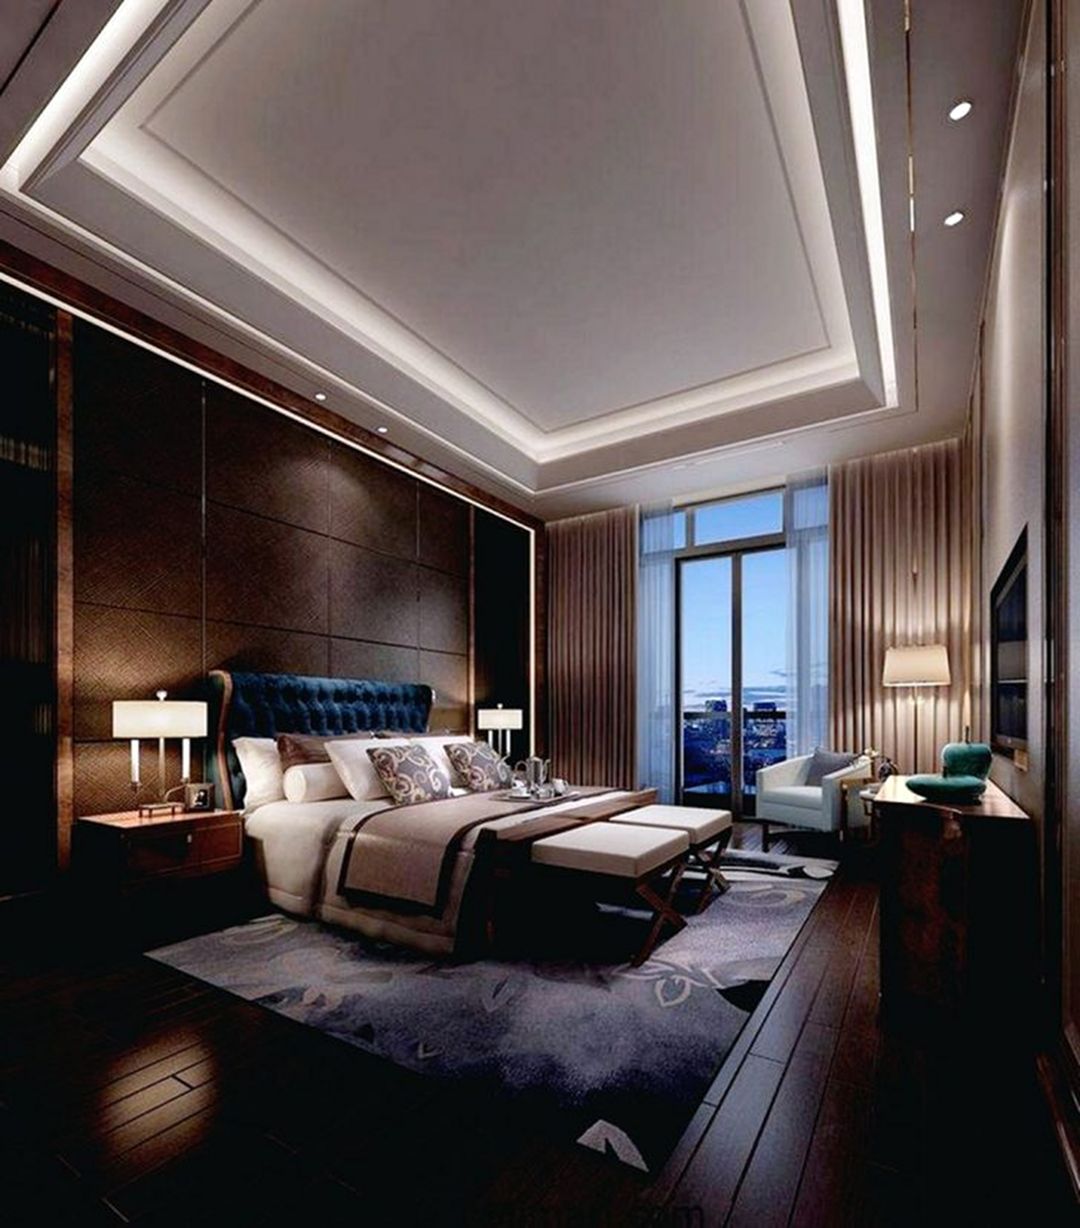 Luxurious Master Bedroom With Dark Interior And Amazing Ceiling Light Design